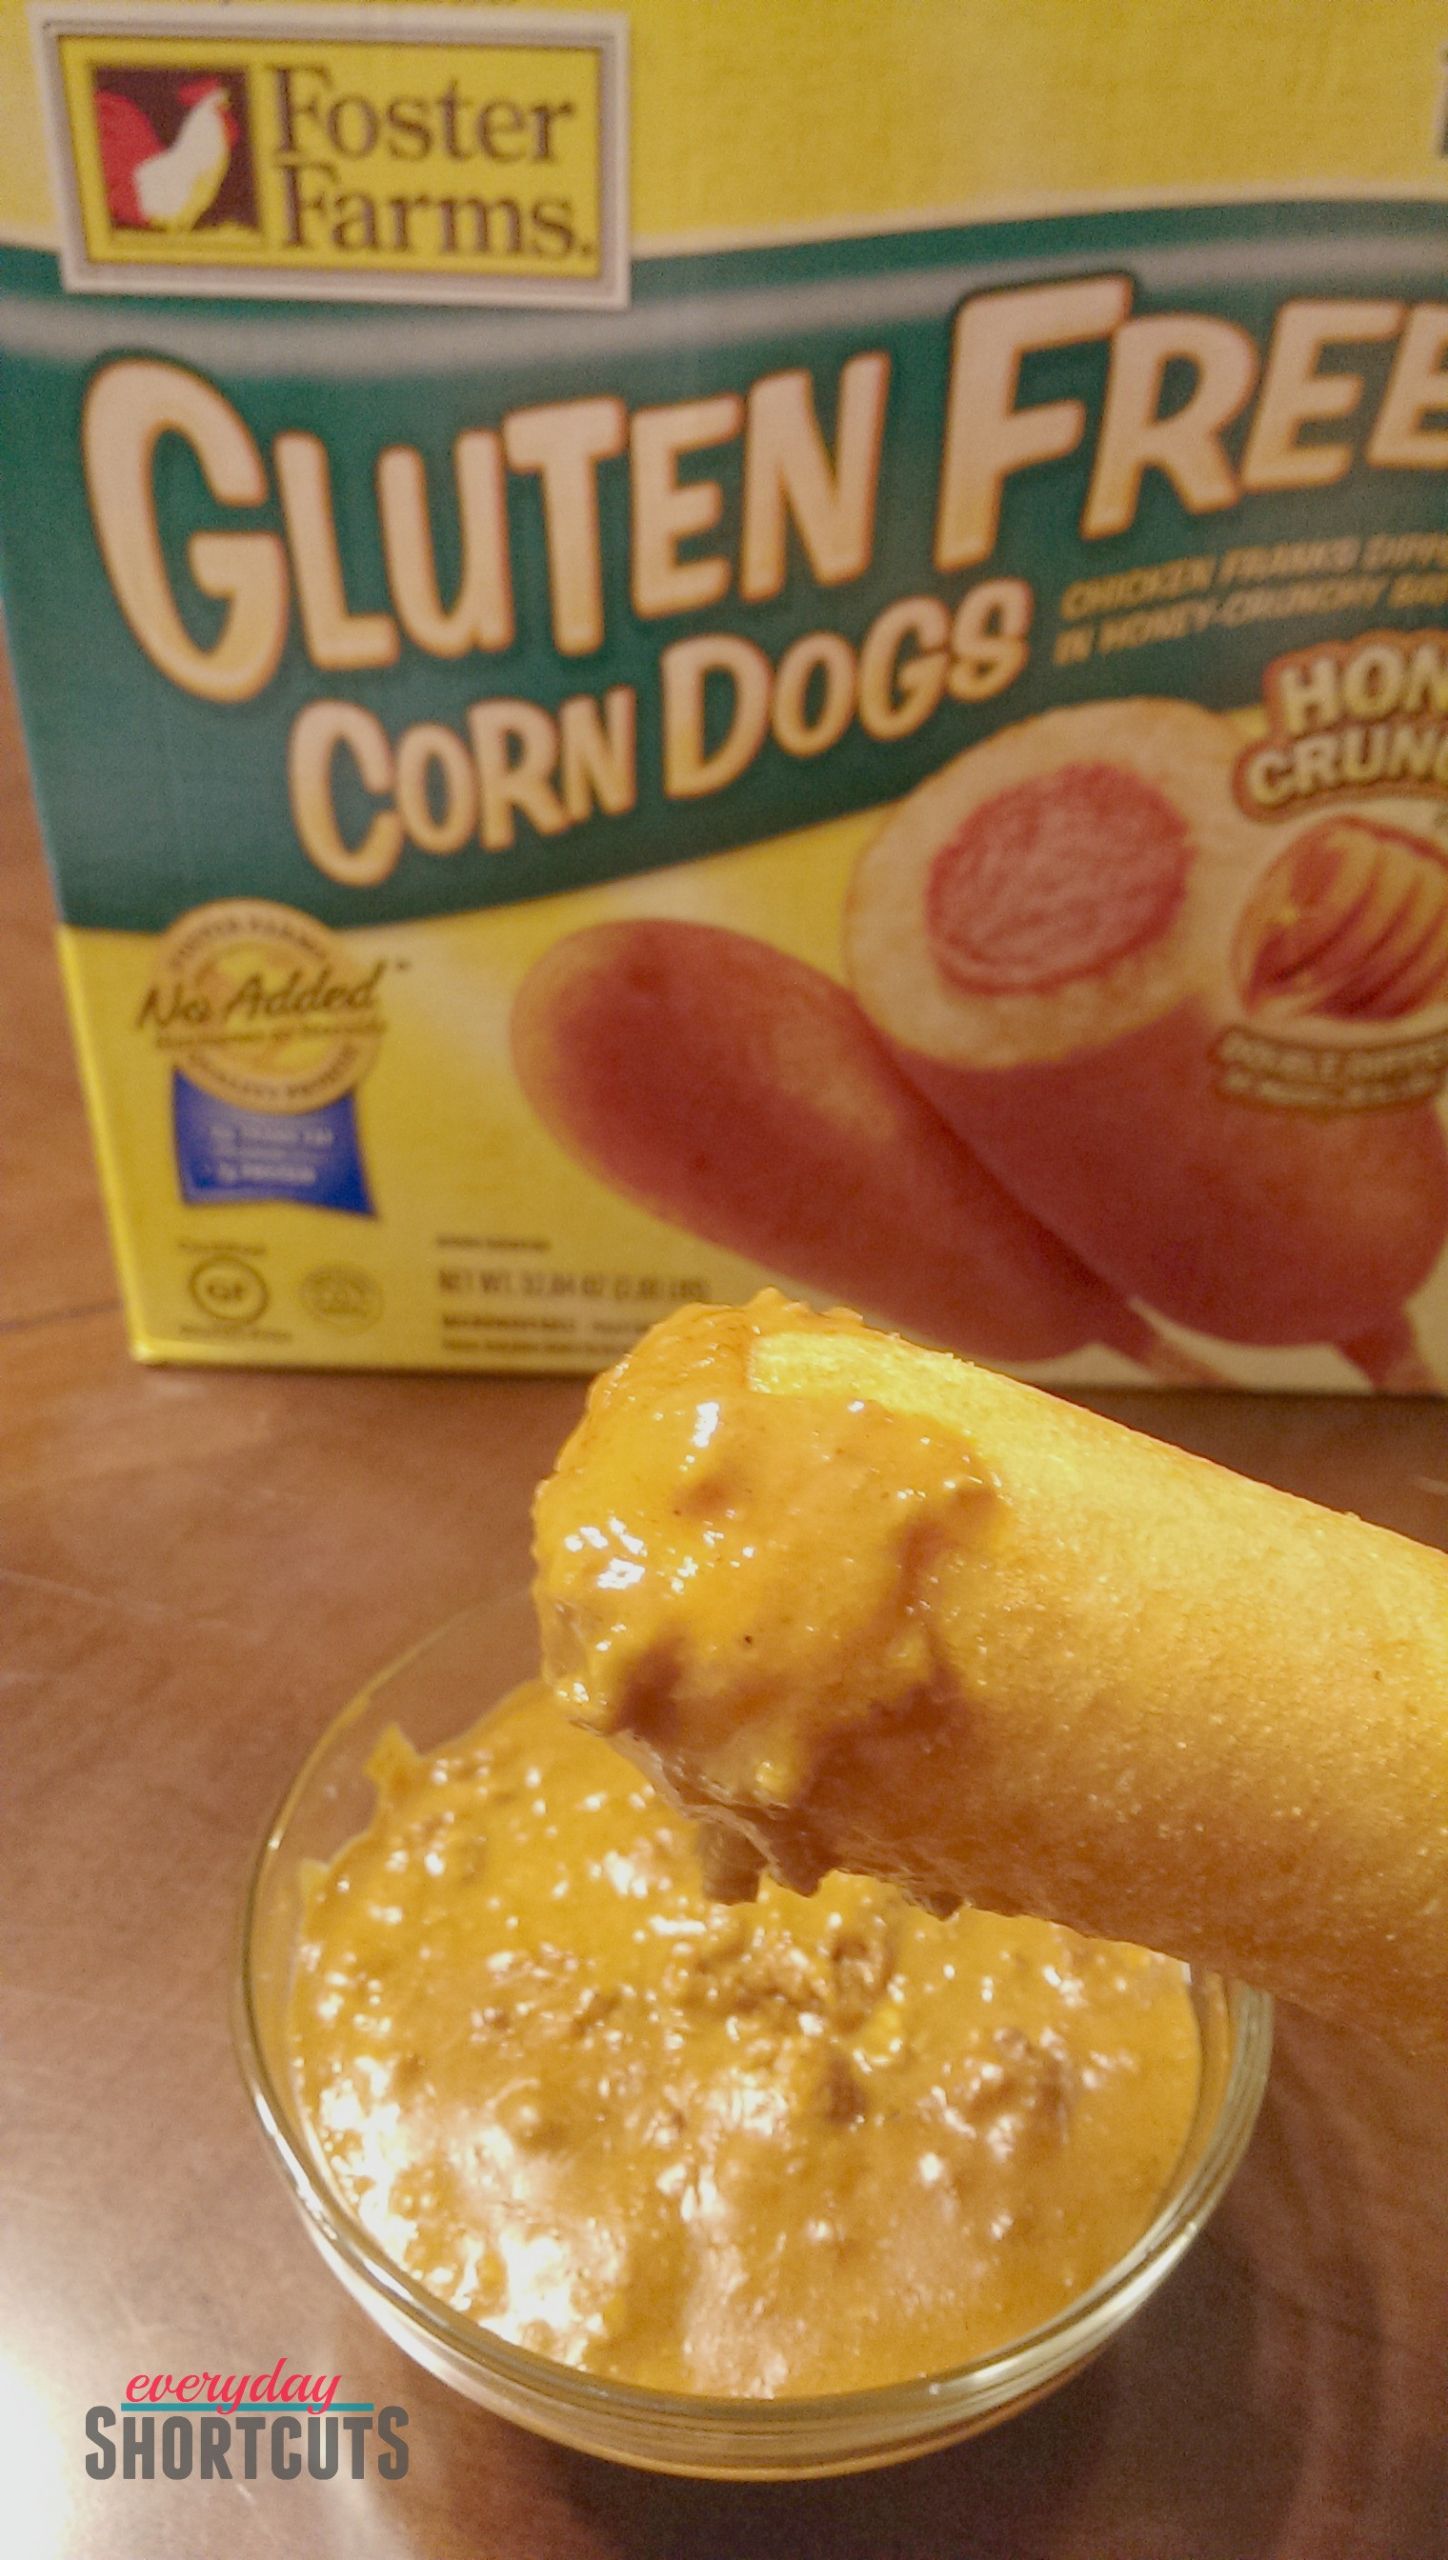 Dipping Sauce For Corn Dogs
 Foster Farms Gluten Free Corn Dogs Dipping Sauce Recipe